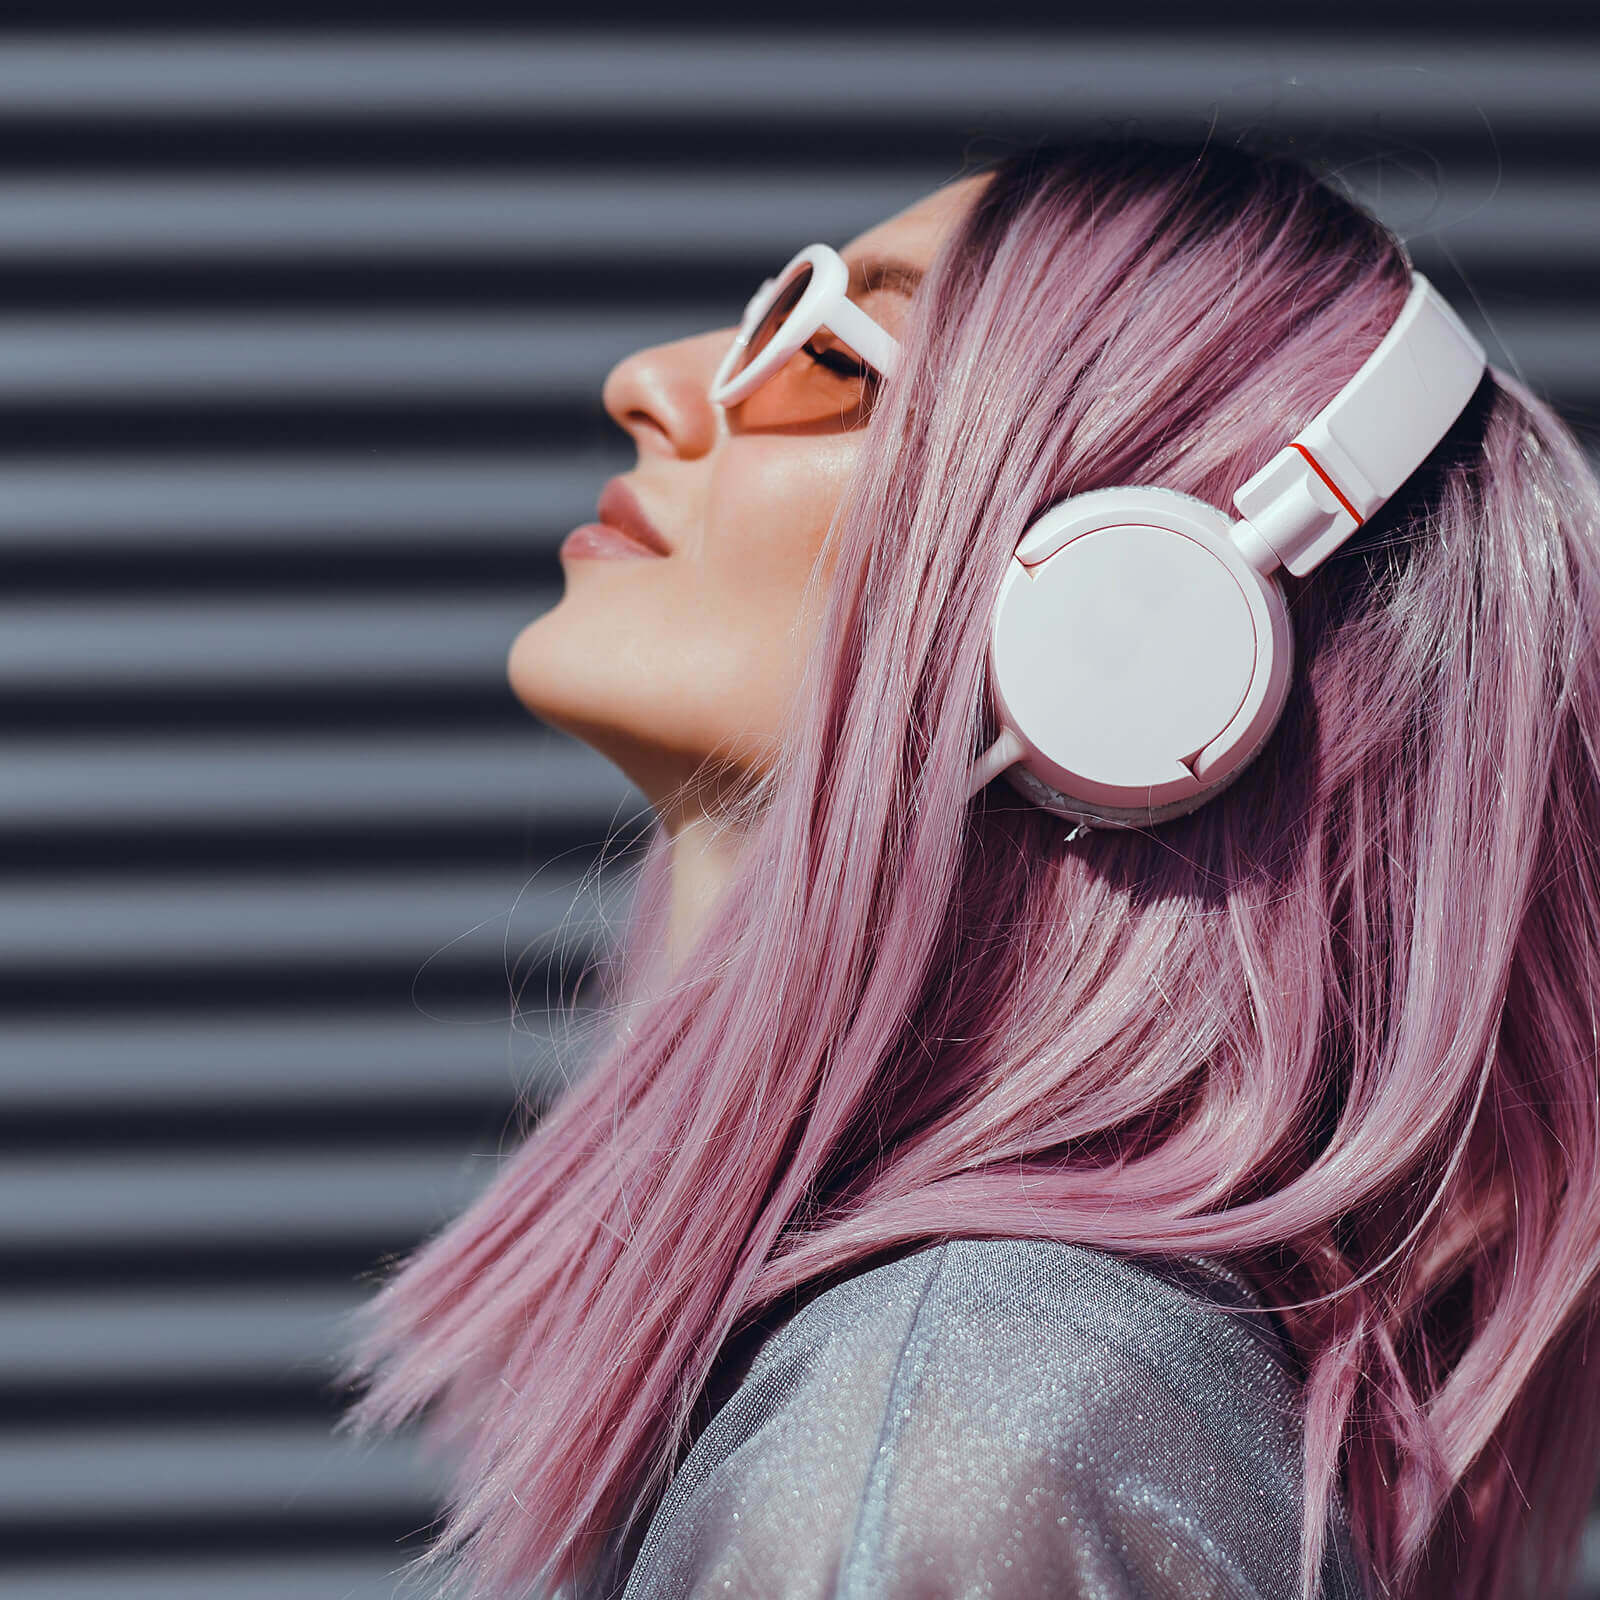 Woman with lilac hair and sunglasses tipping head back and listening to headphones.